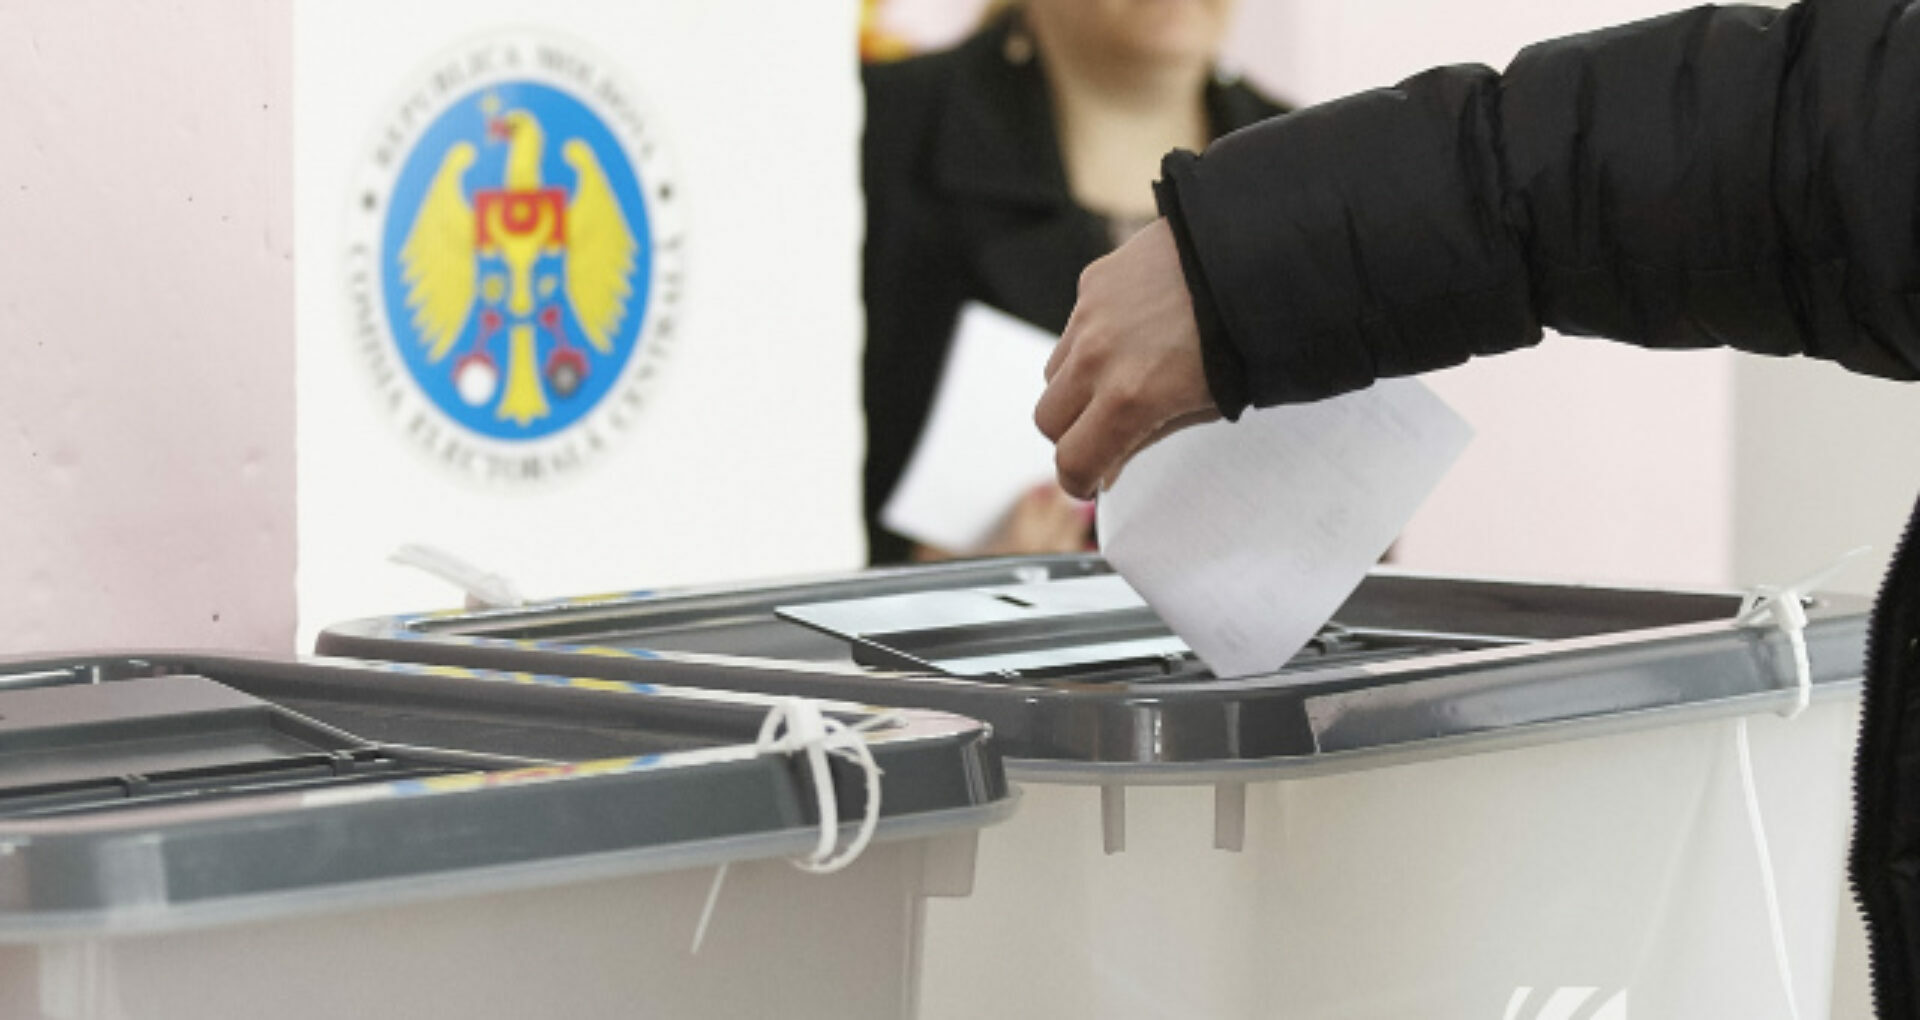 The New Draft Amendments to the Electoral Code Spark Criticism